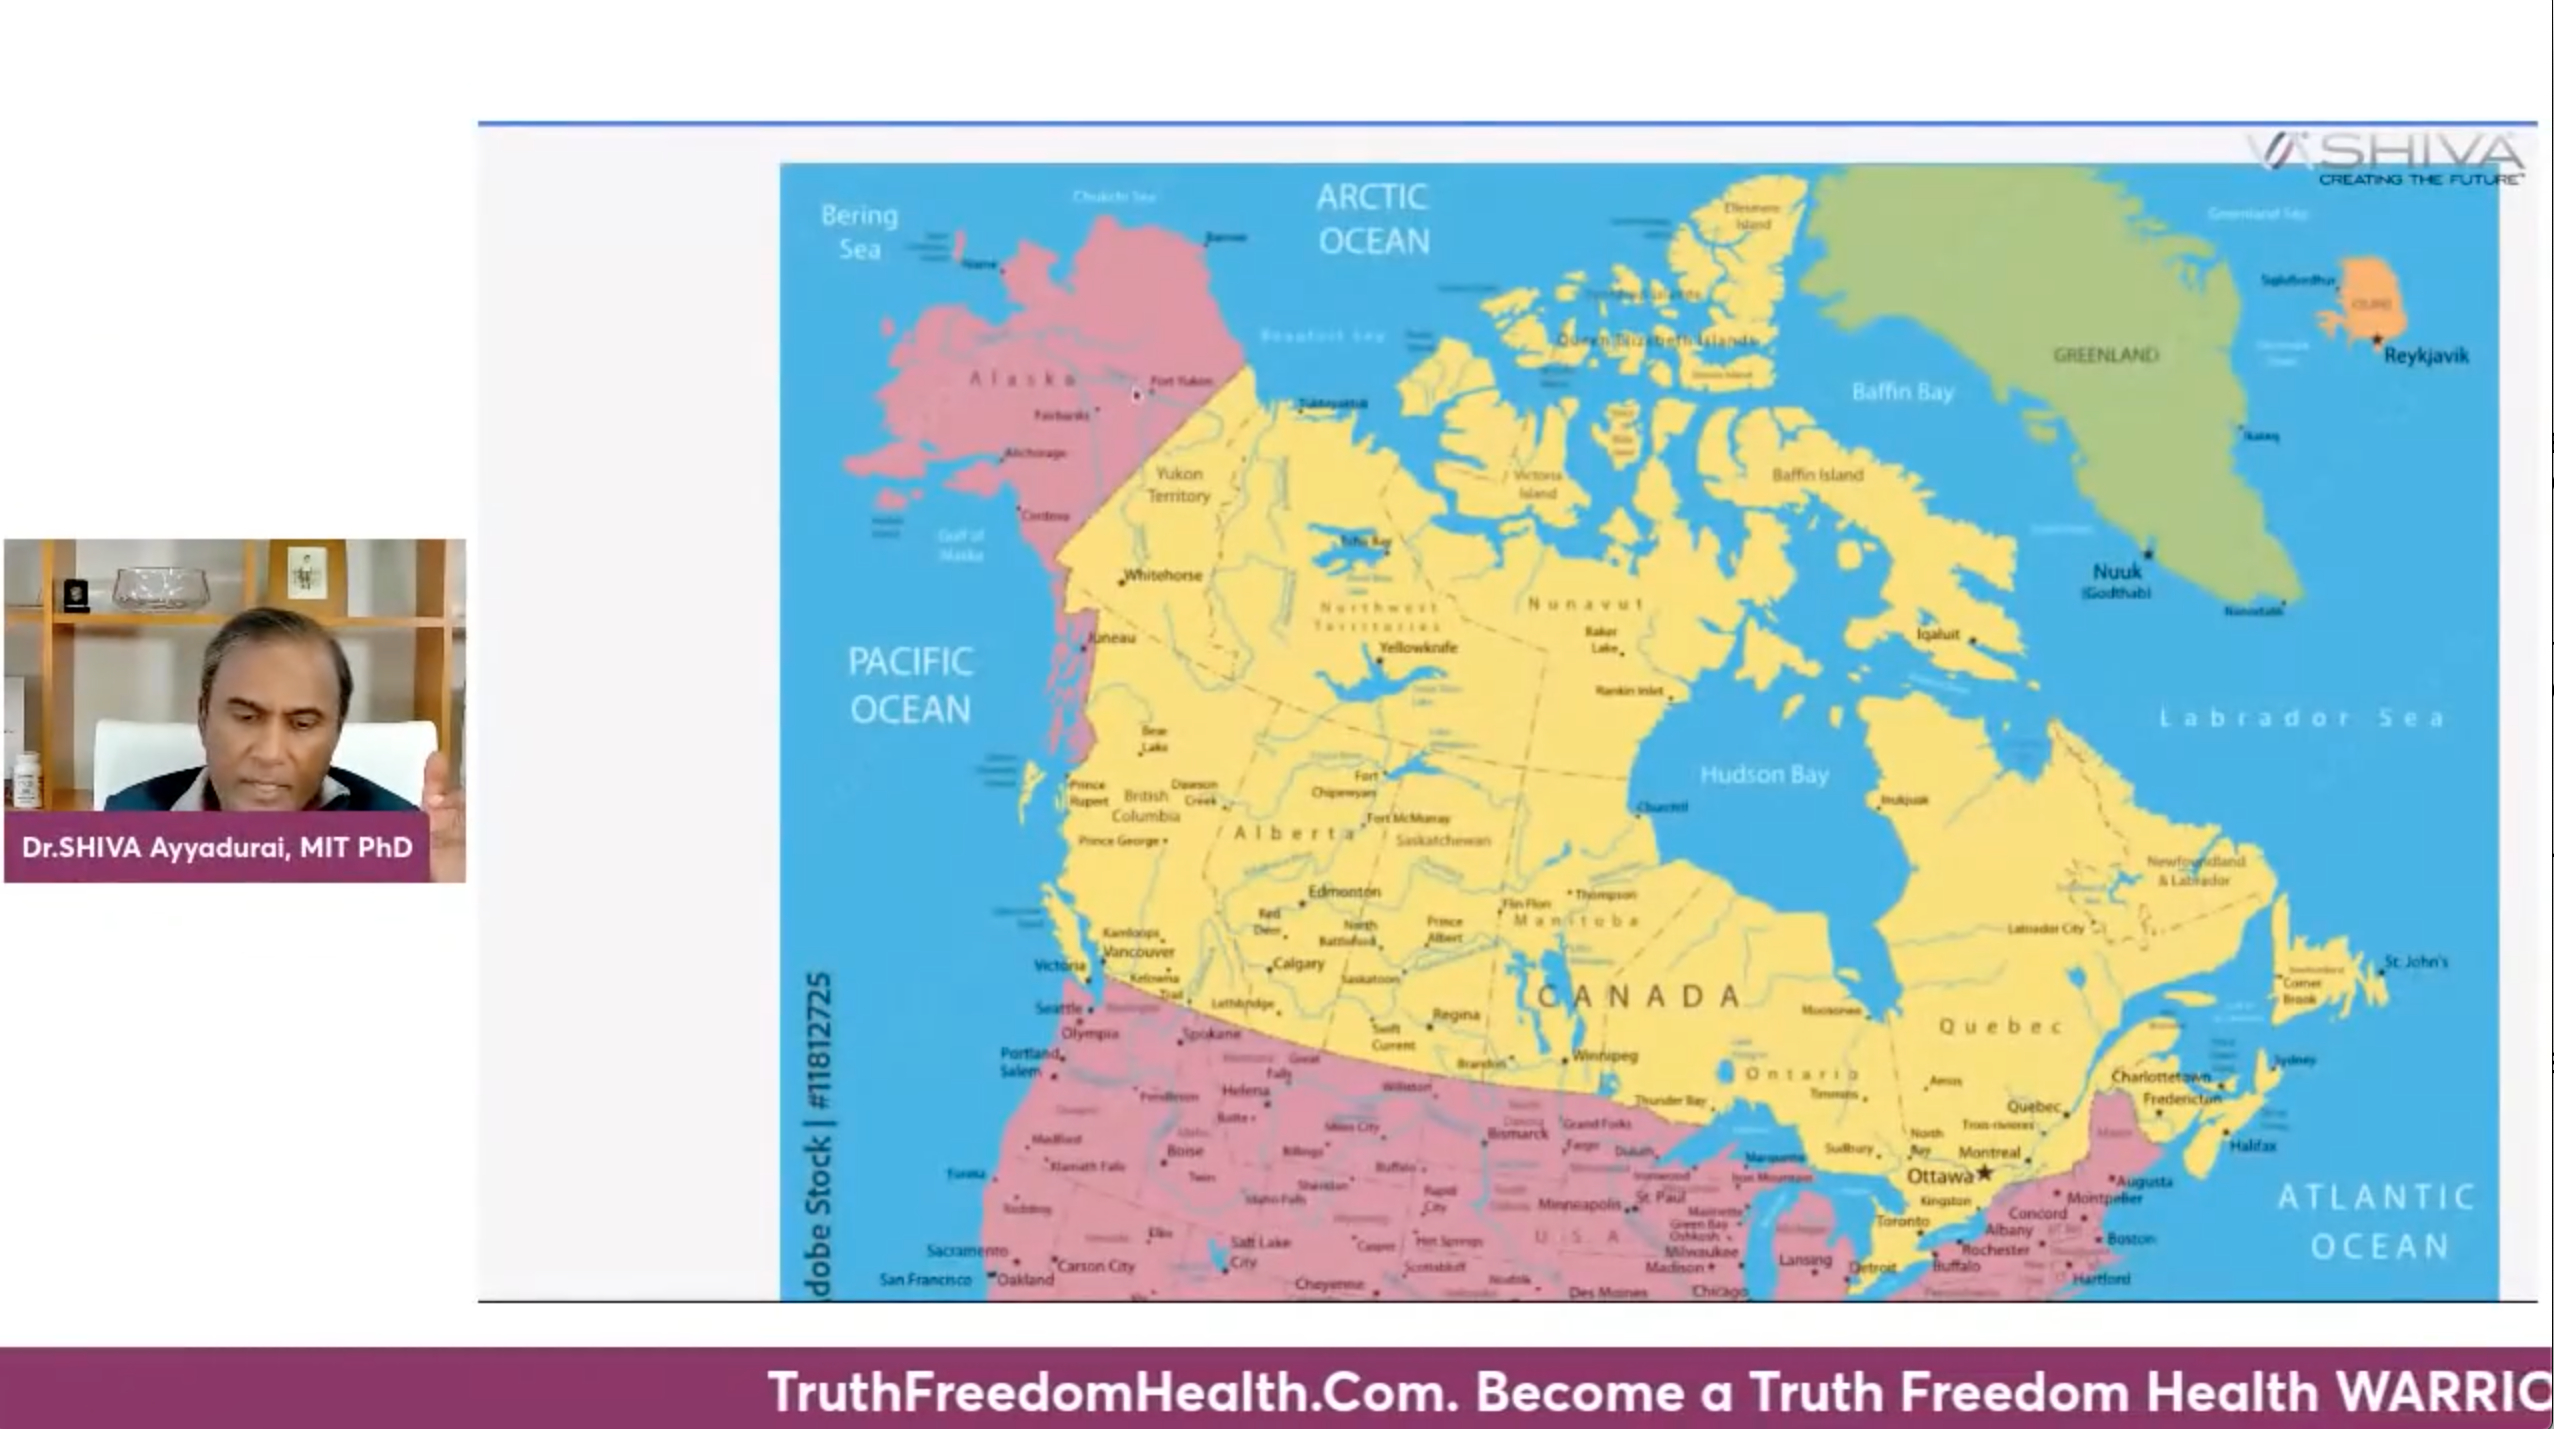 Dr.SHIVA LIVE: Canadian Government Gets Ready to Starve Alaska. Workers Unite!